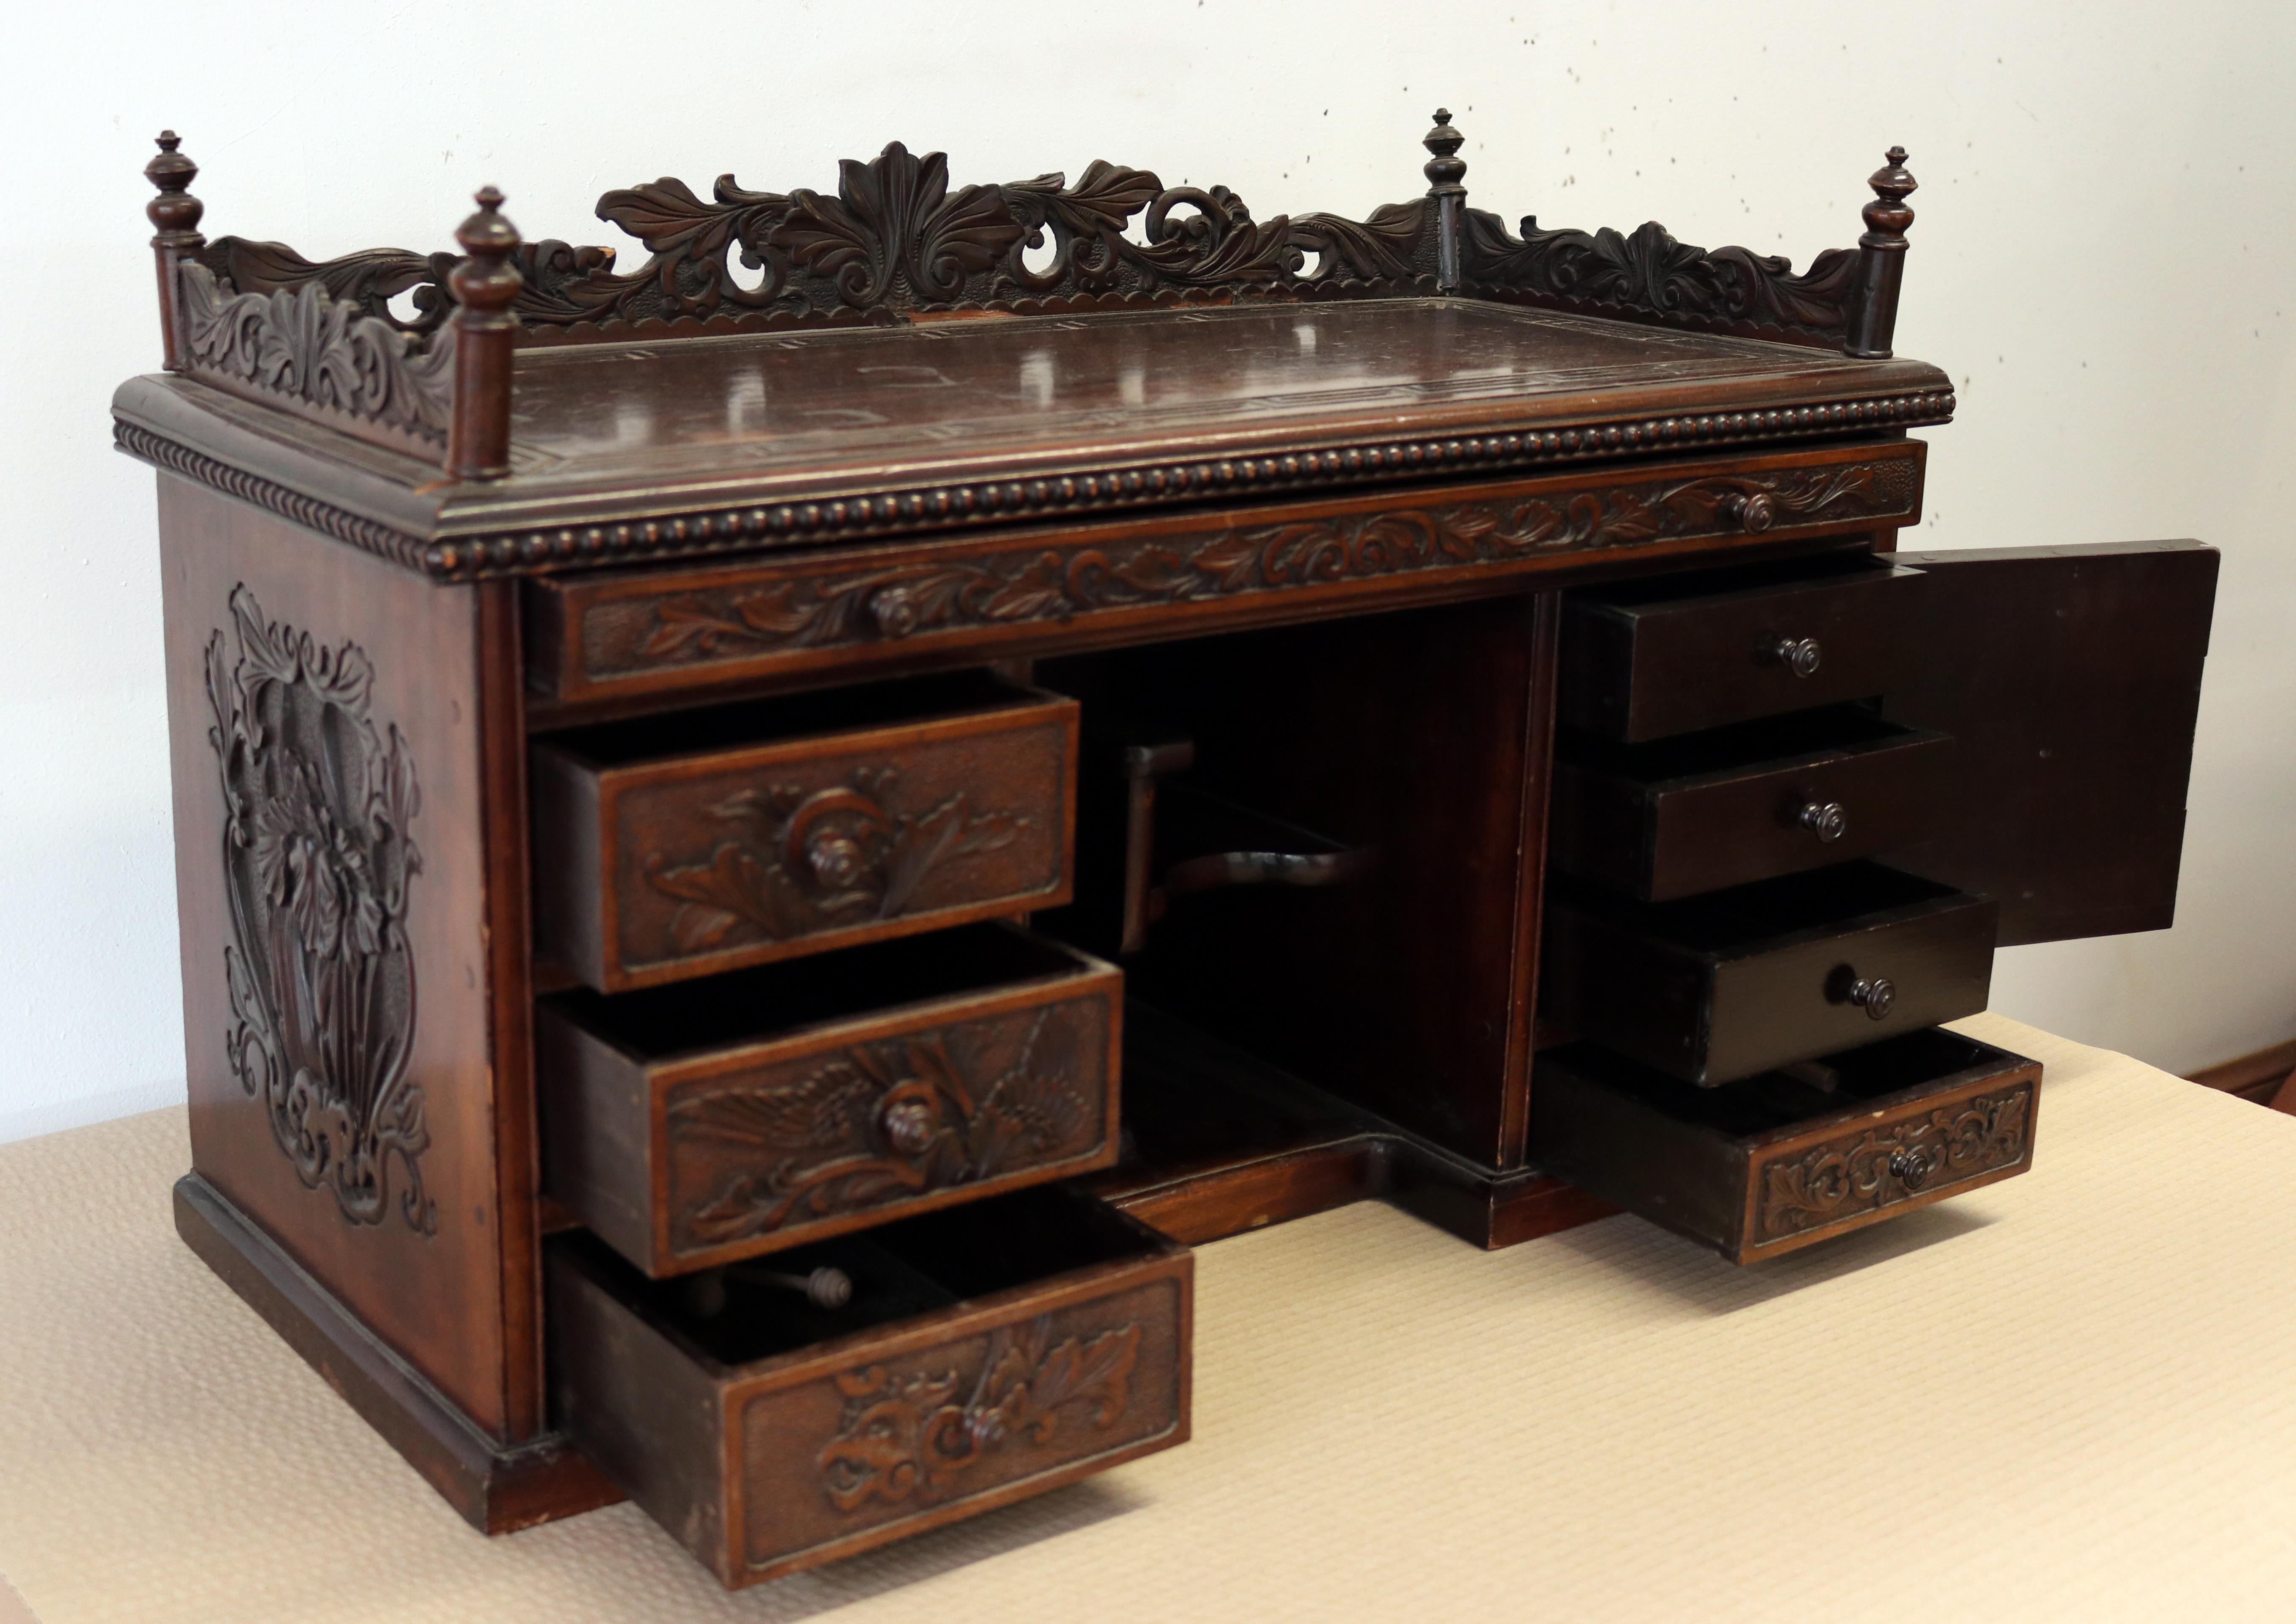 Hardwood Chinese Oriental Gothic Dark Carved Wood Chest Cabinet In Fair Condition For Sale In Glencarse, Perthshire